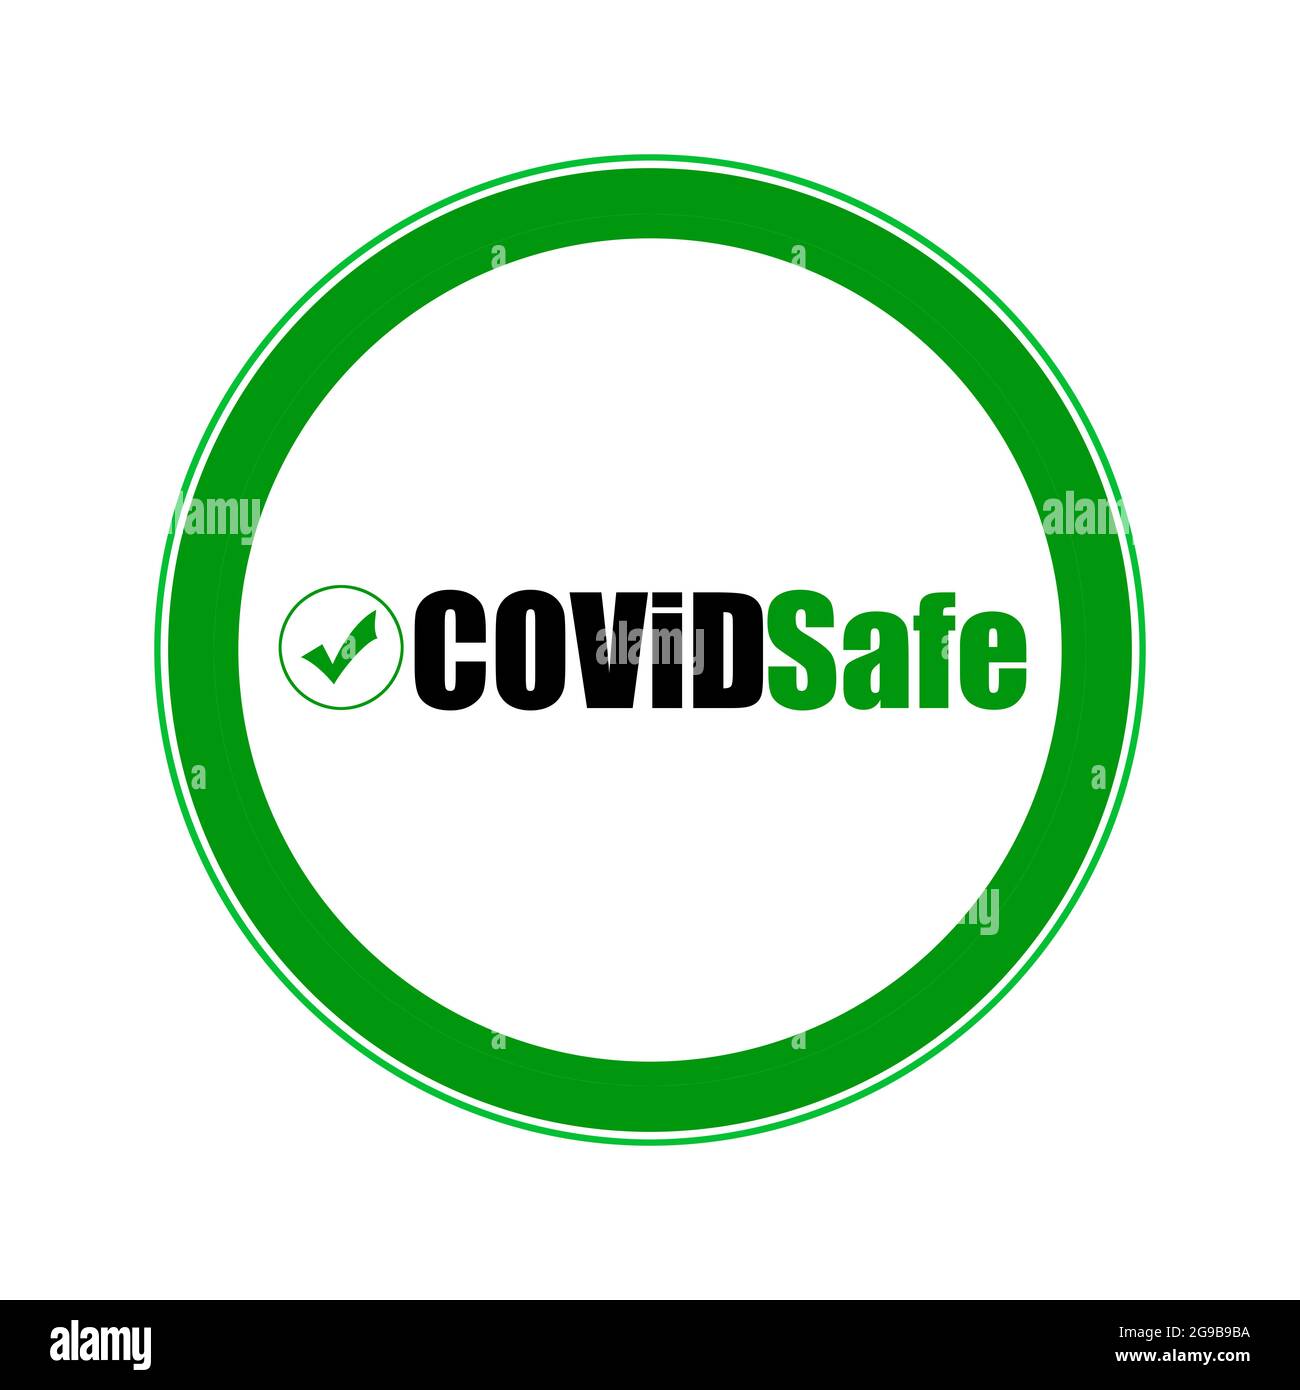 COVID safe green sticker illustration sign for pos, blogs, posters. covid-19 coronavirus pandemic, covid safe economy and environment business concept Stock Photo